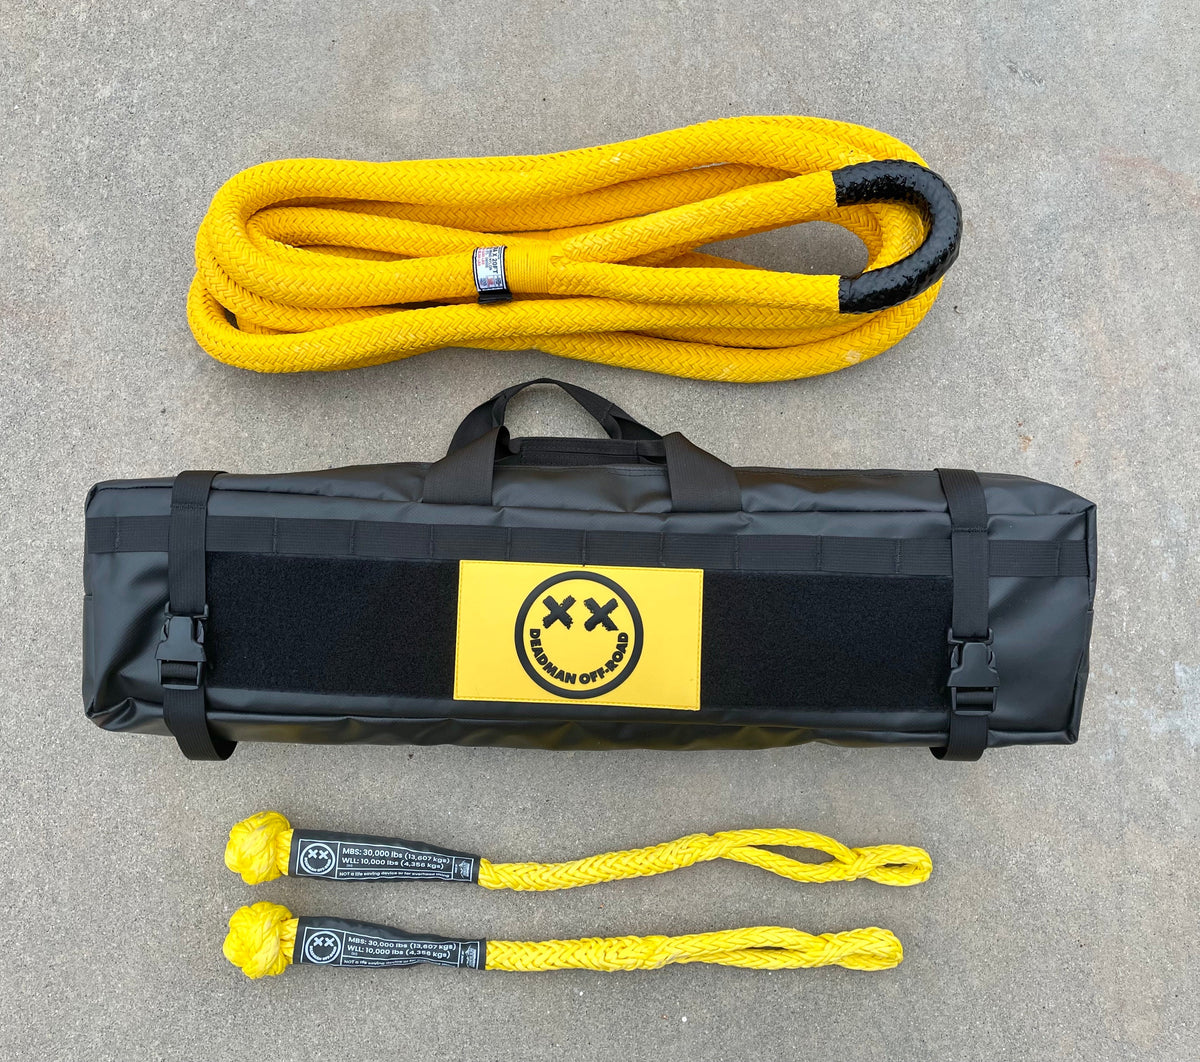 Stretchy Band Kits 7/8" x 20' - Original Shackle - $299.97 Recovery Gear, Camping Gear Deadman Off-Road- Overland Kitted